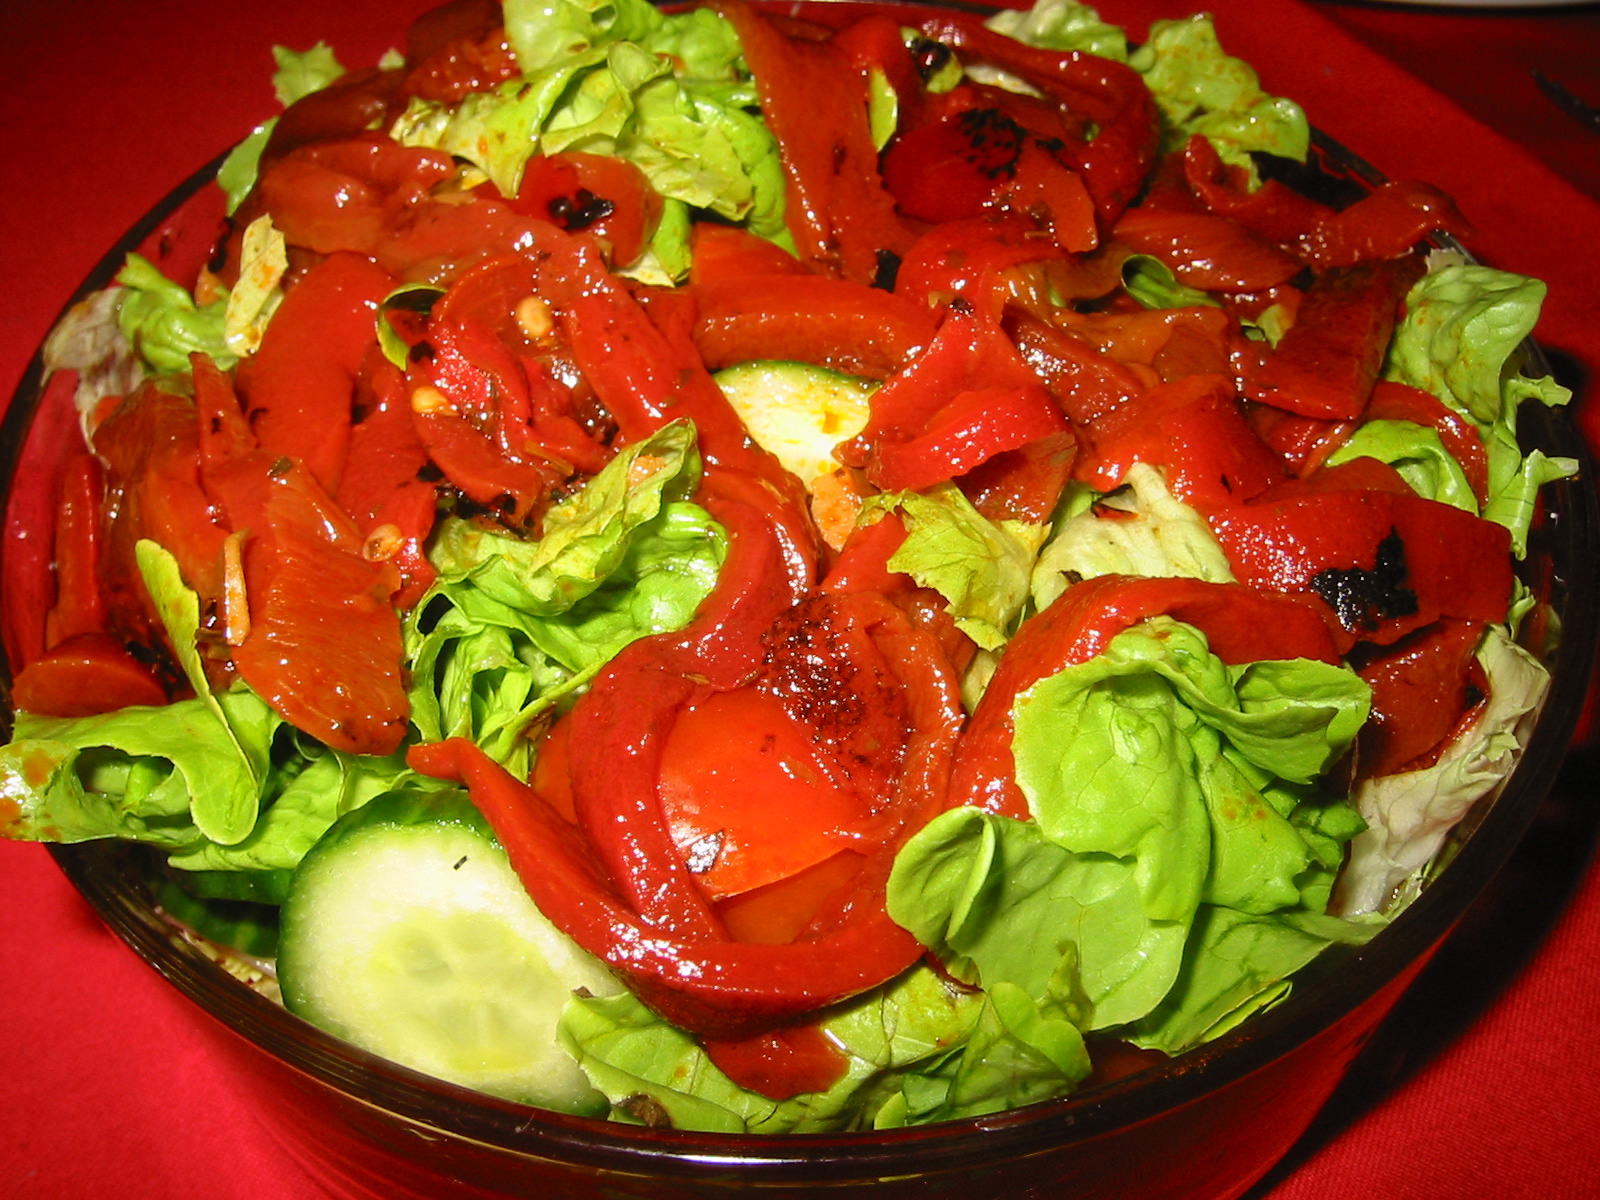 Salad with roasted red capsicum